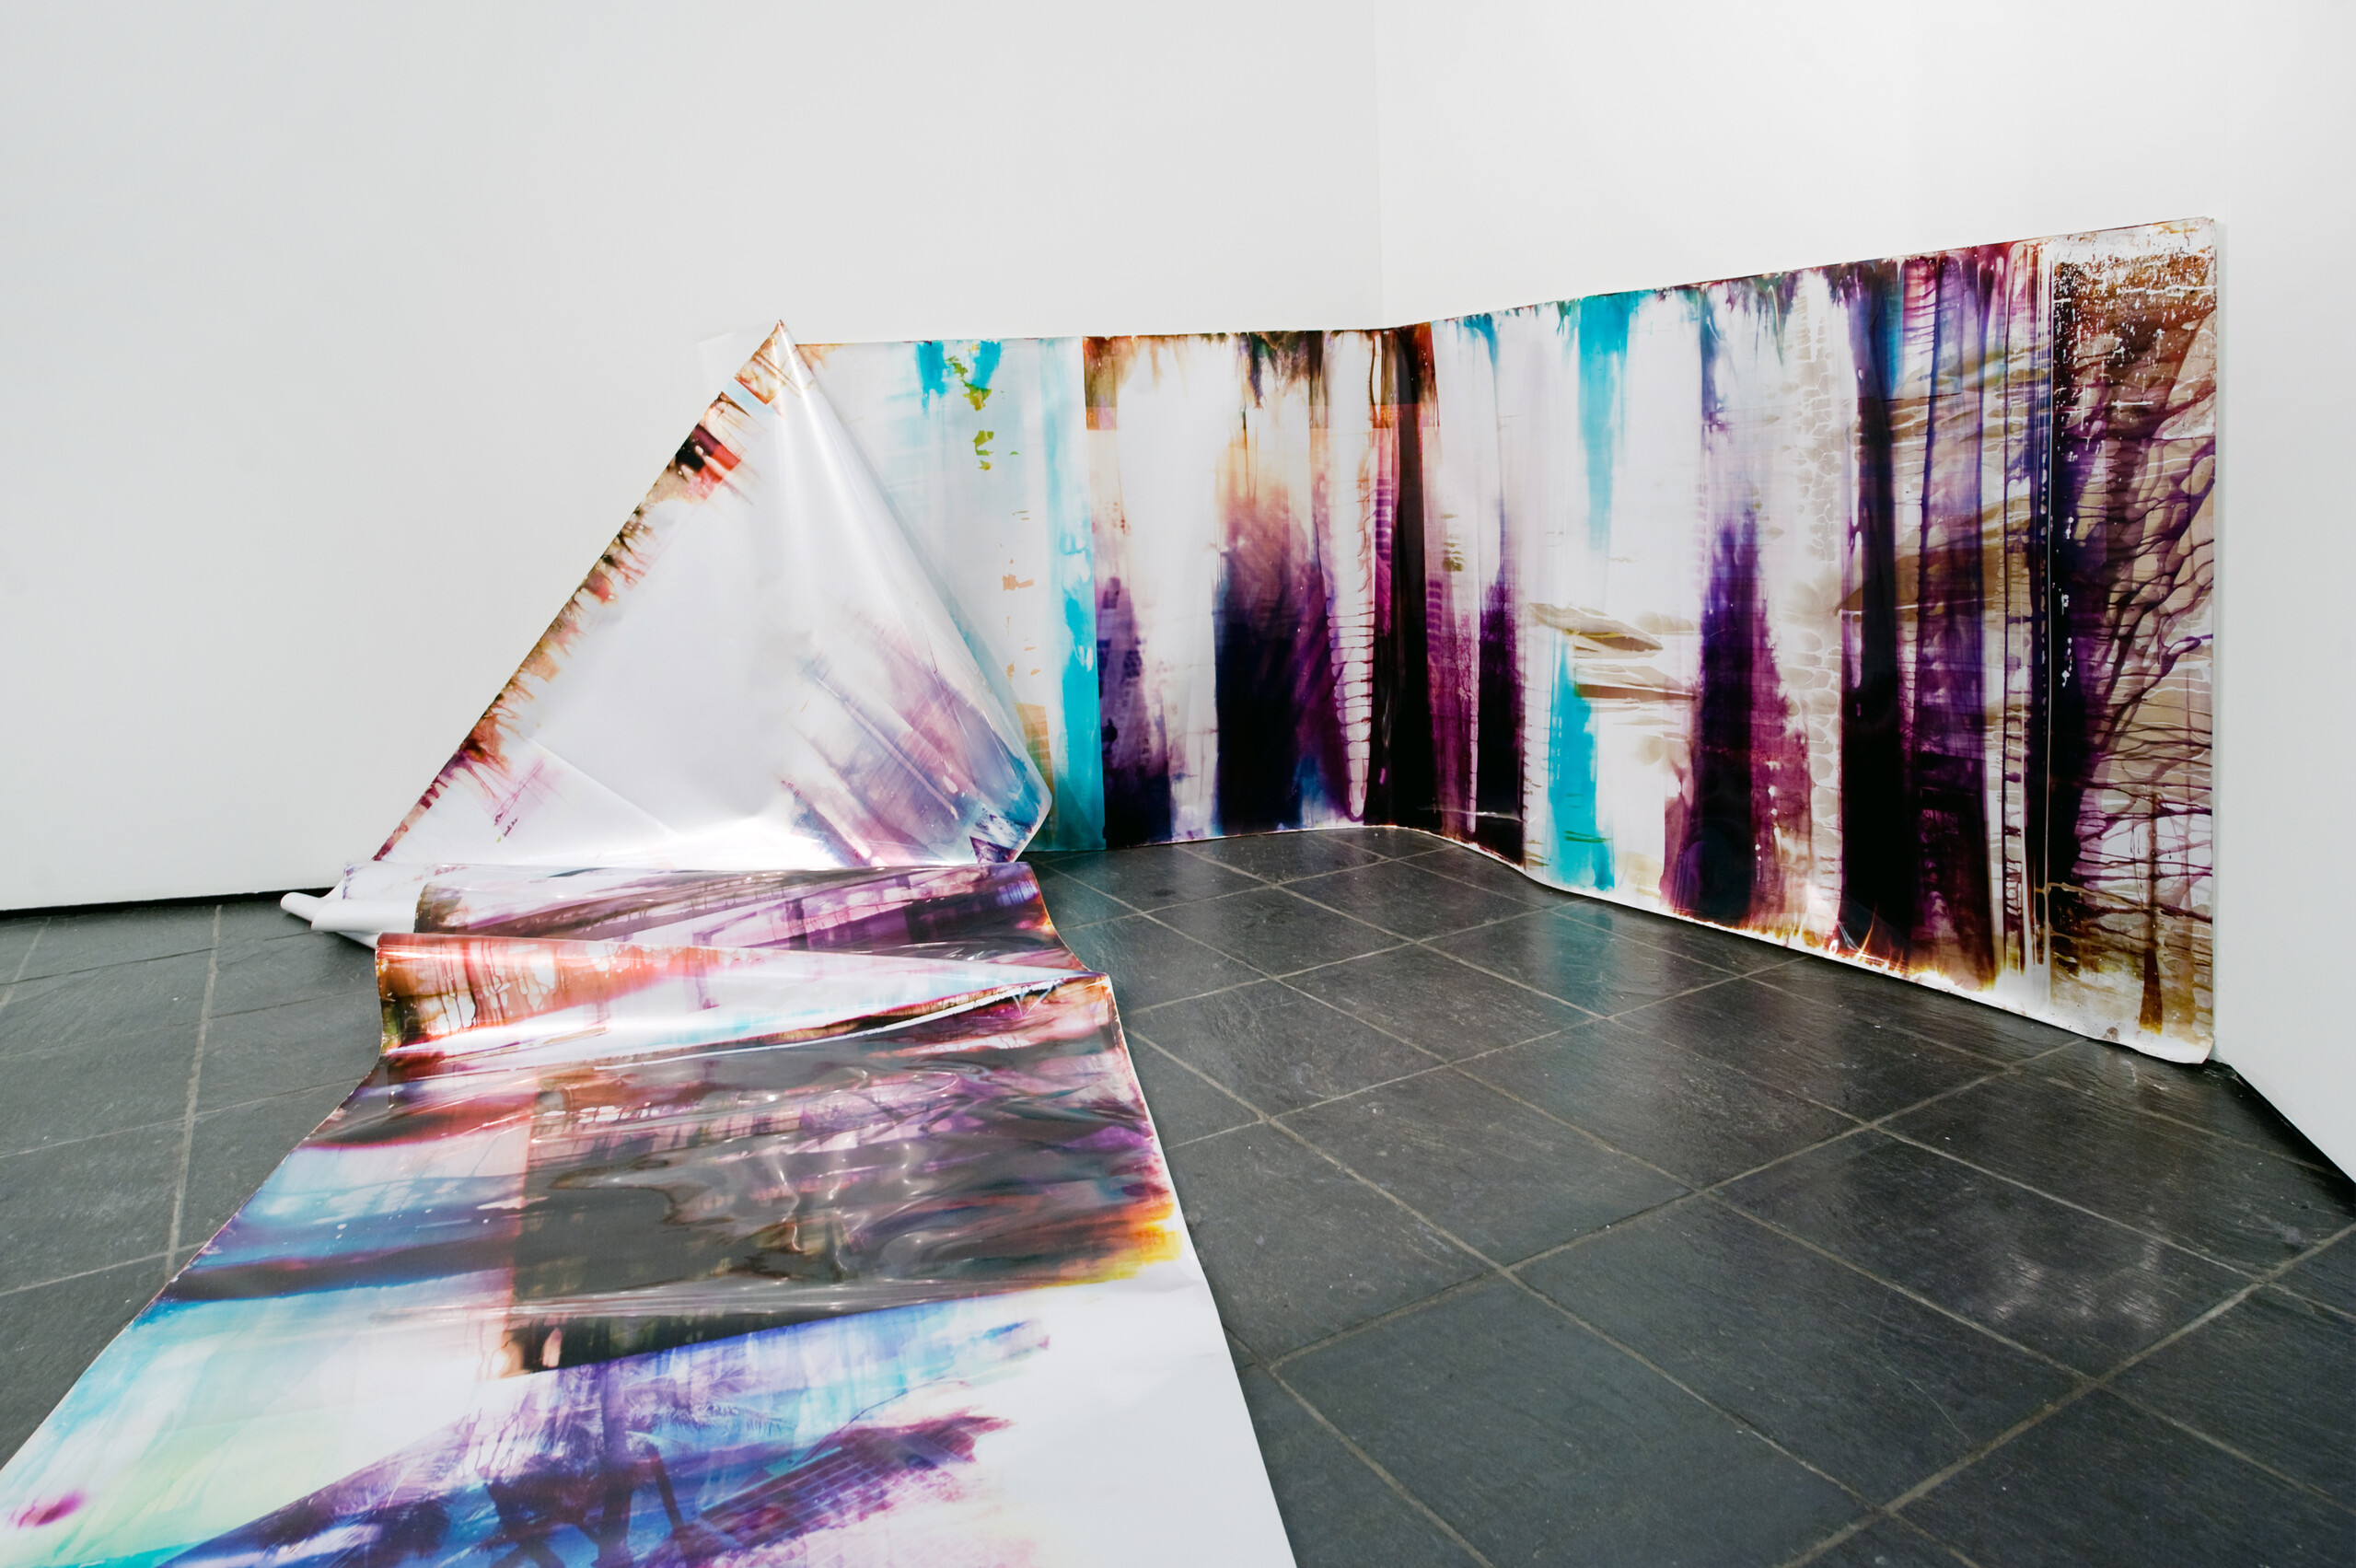 In an art gallery with white walls, a long, snake-like piece of metallic paper printed with splotches of black, blue, purple, and orange in an abstract pattern is partly affixed to the wall. At one point the paper falls from the wall and cascades onto the floor and further into the room.